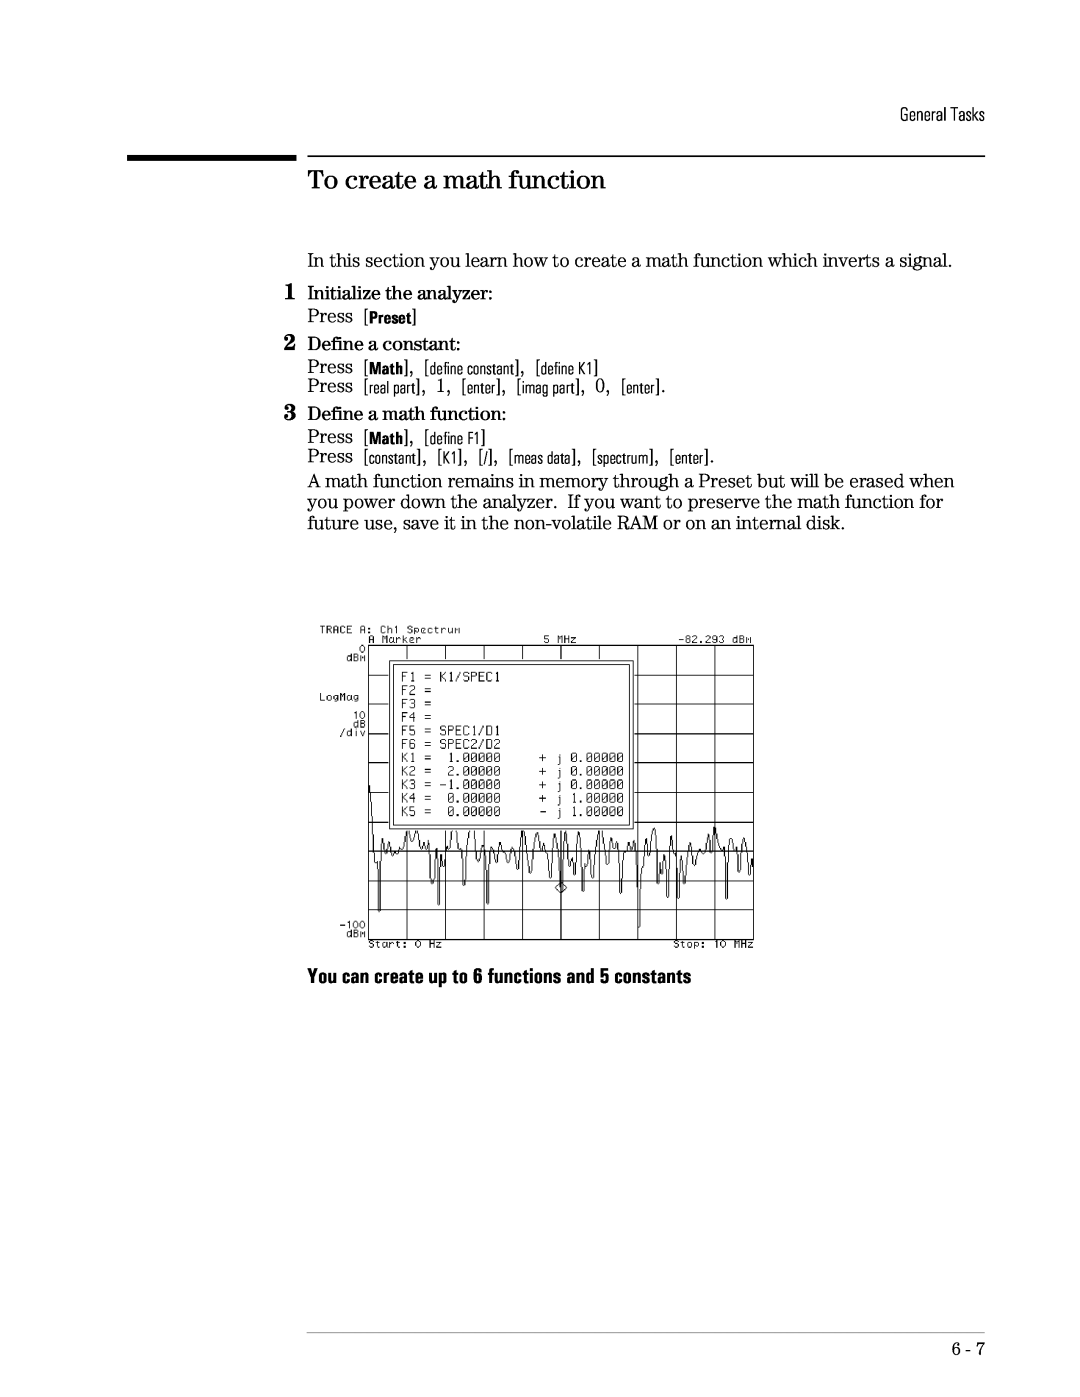 Agilent Technologies 89441A To create a math function, You can create up to 6 functions and 5 constants, General Tasks 